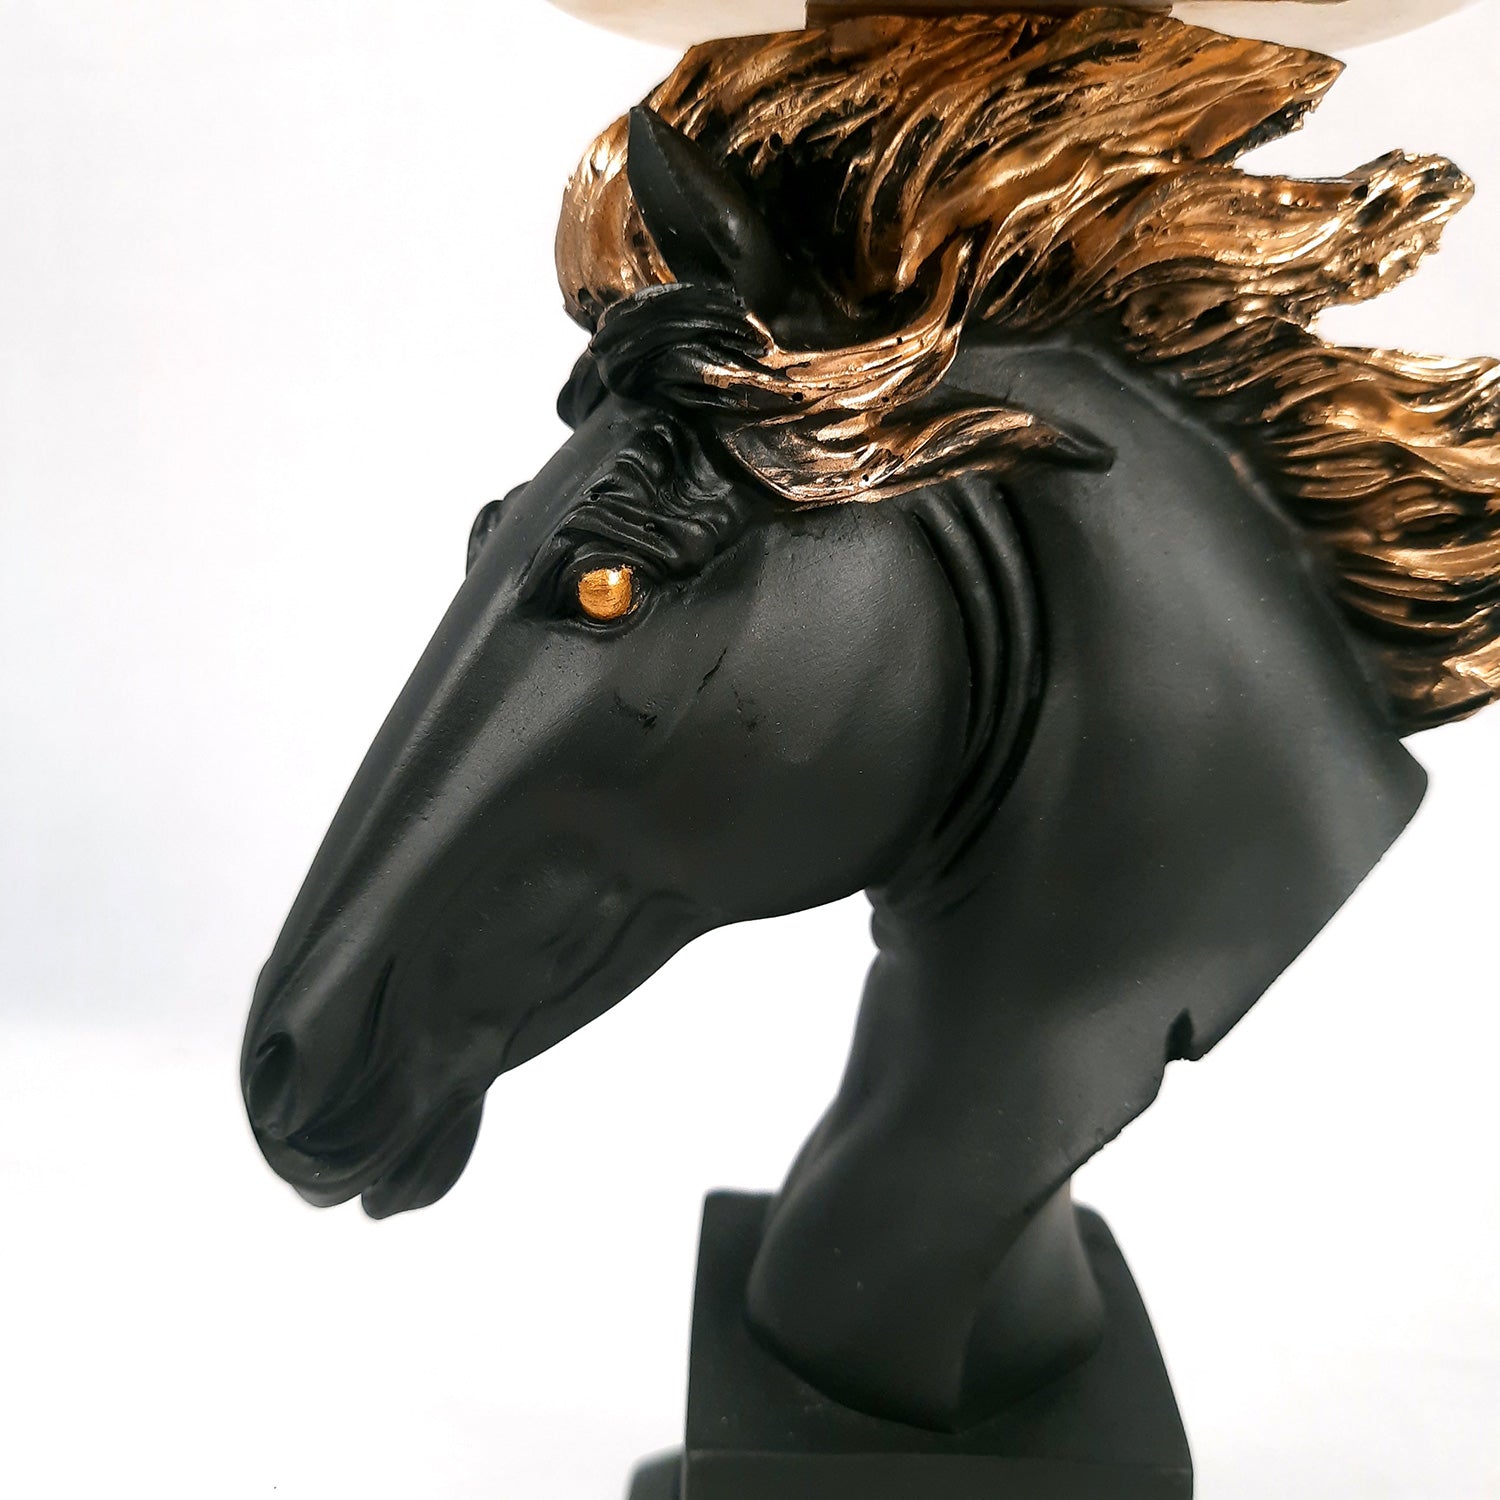 Horse Statue With Detachable Tray For Keeping Small Plant / Chocolates | Horse Face Showpiece - for Home, Table, Shelf, Good Luck, Vastu & Office Desk Decor - 10 Inch - Apkamart #Color_Black